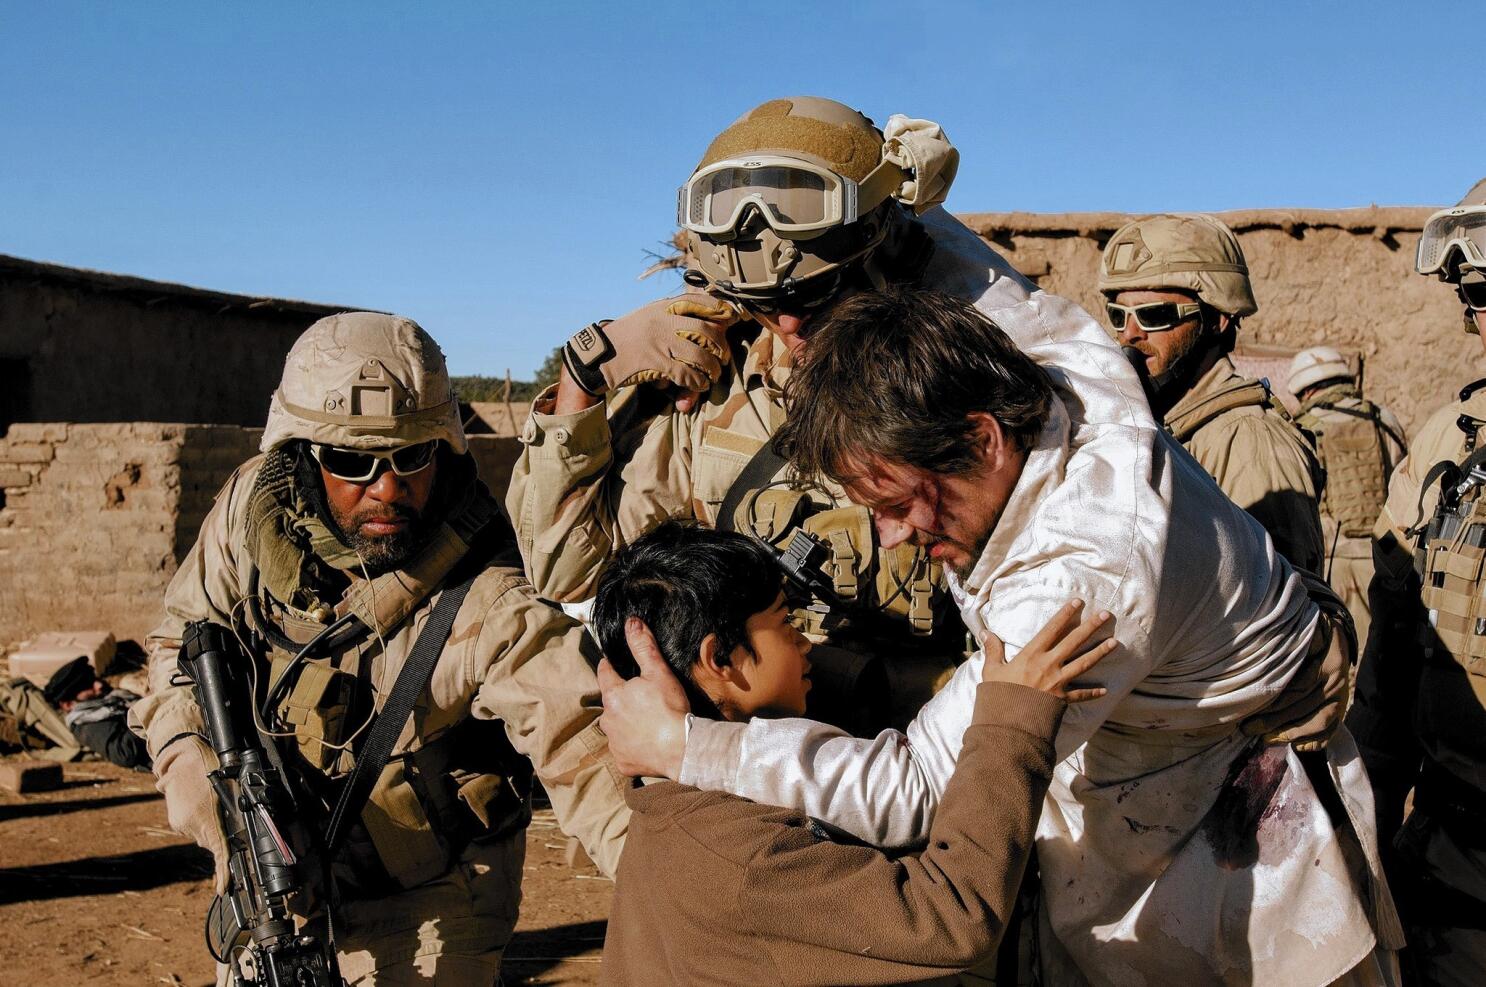 The Real-Life Story Behind “Lone Survivor”